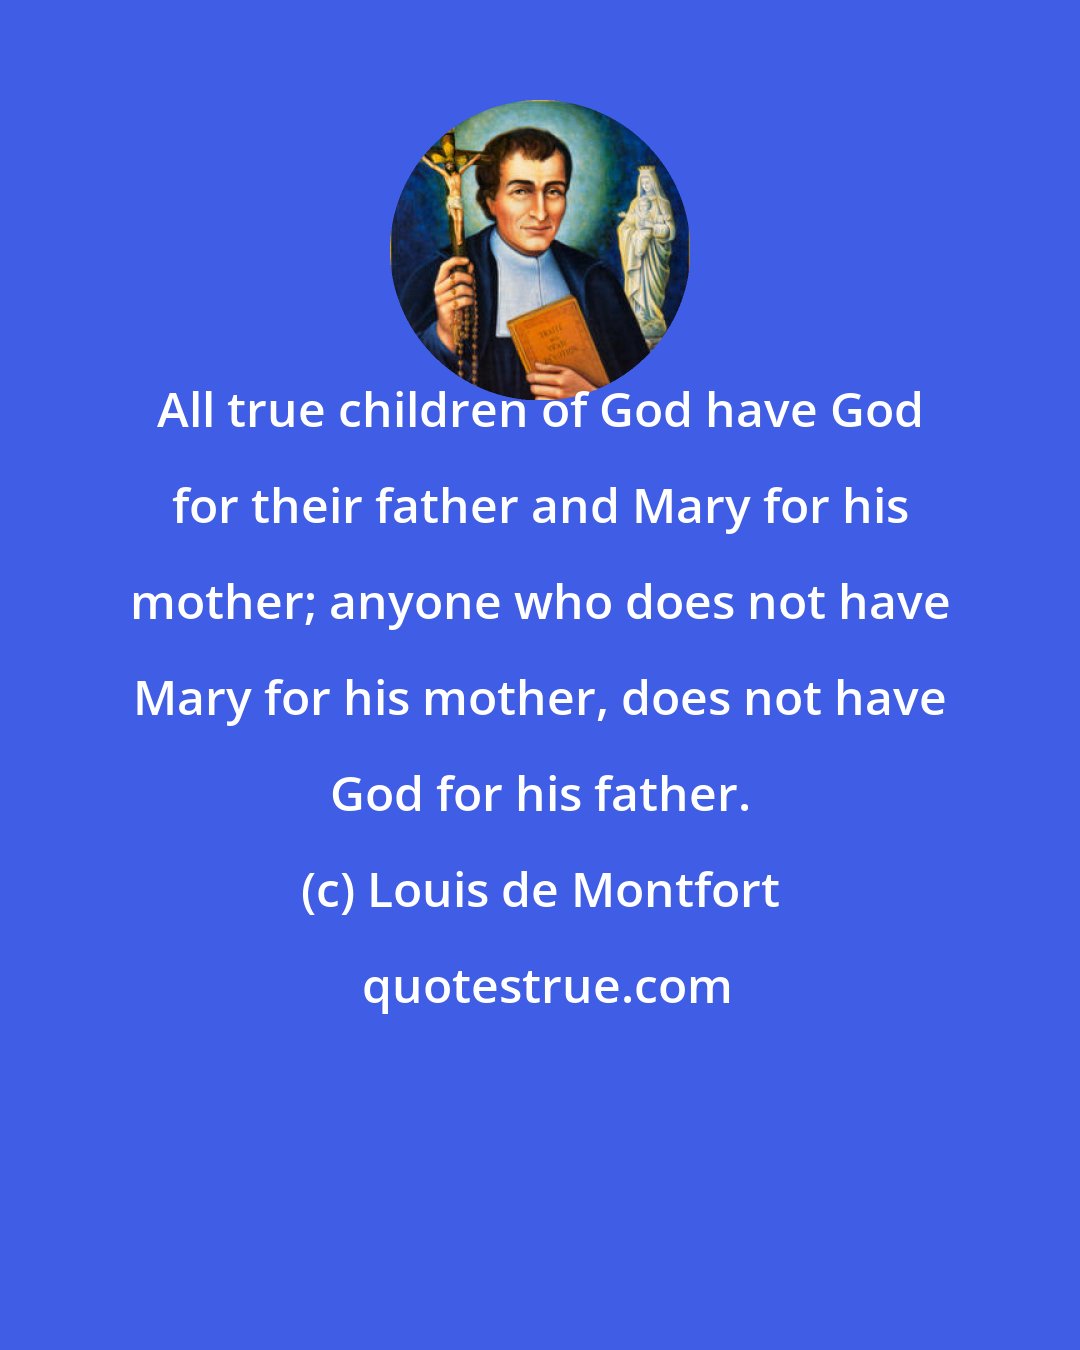 Louis de Montfort: All true children of God have God for their father and Mary for his mother; anyone who does not have Mary for his mother, does not have God for his father.